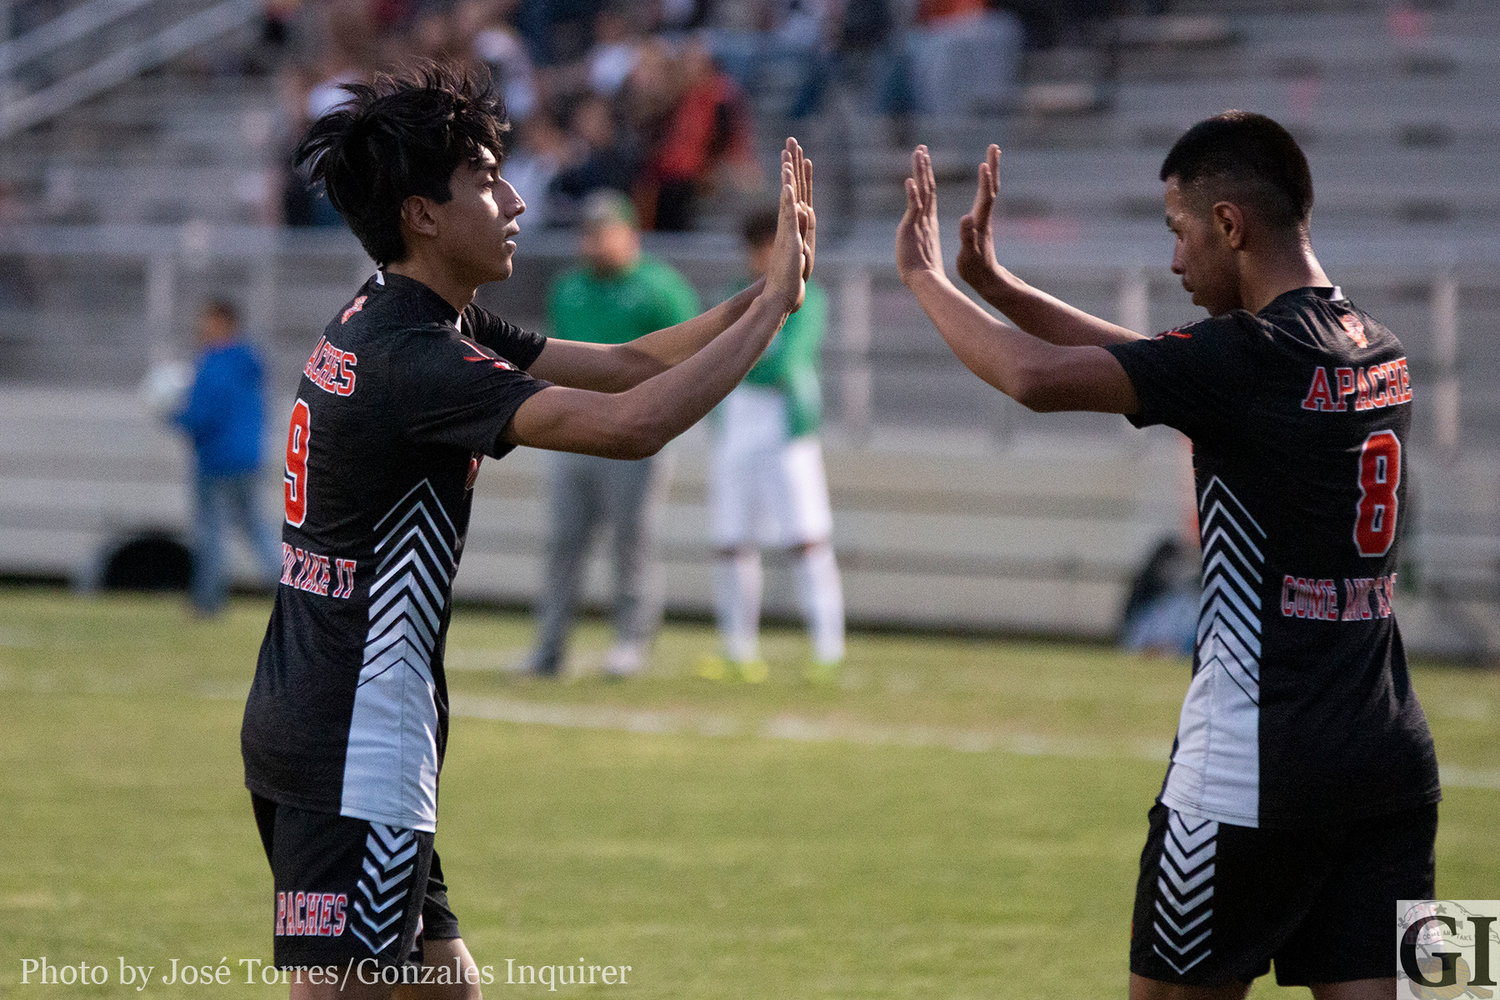 Adrian Rodriguez (9) and Antonio Hernandez (8) connected for a goal, celebrating during the first half of Gonzales' 7-1 win over Pleasanton.